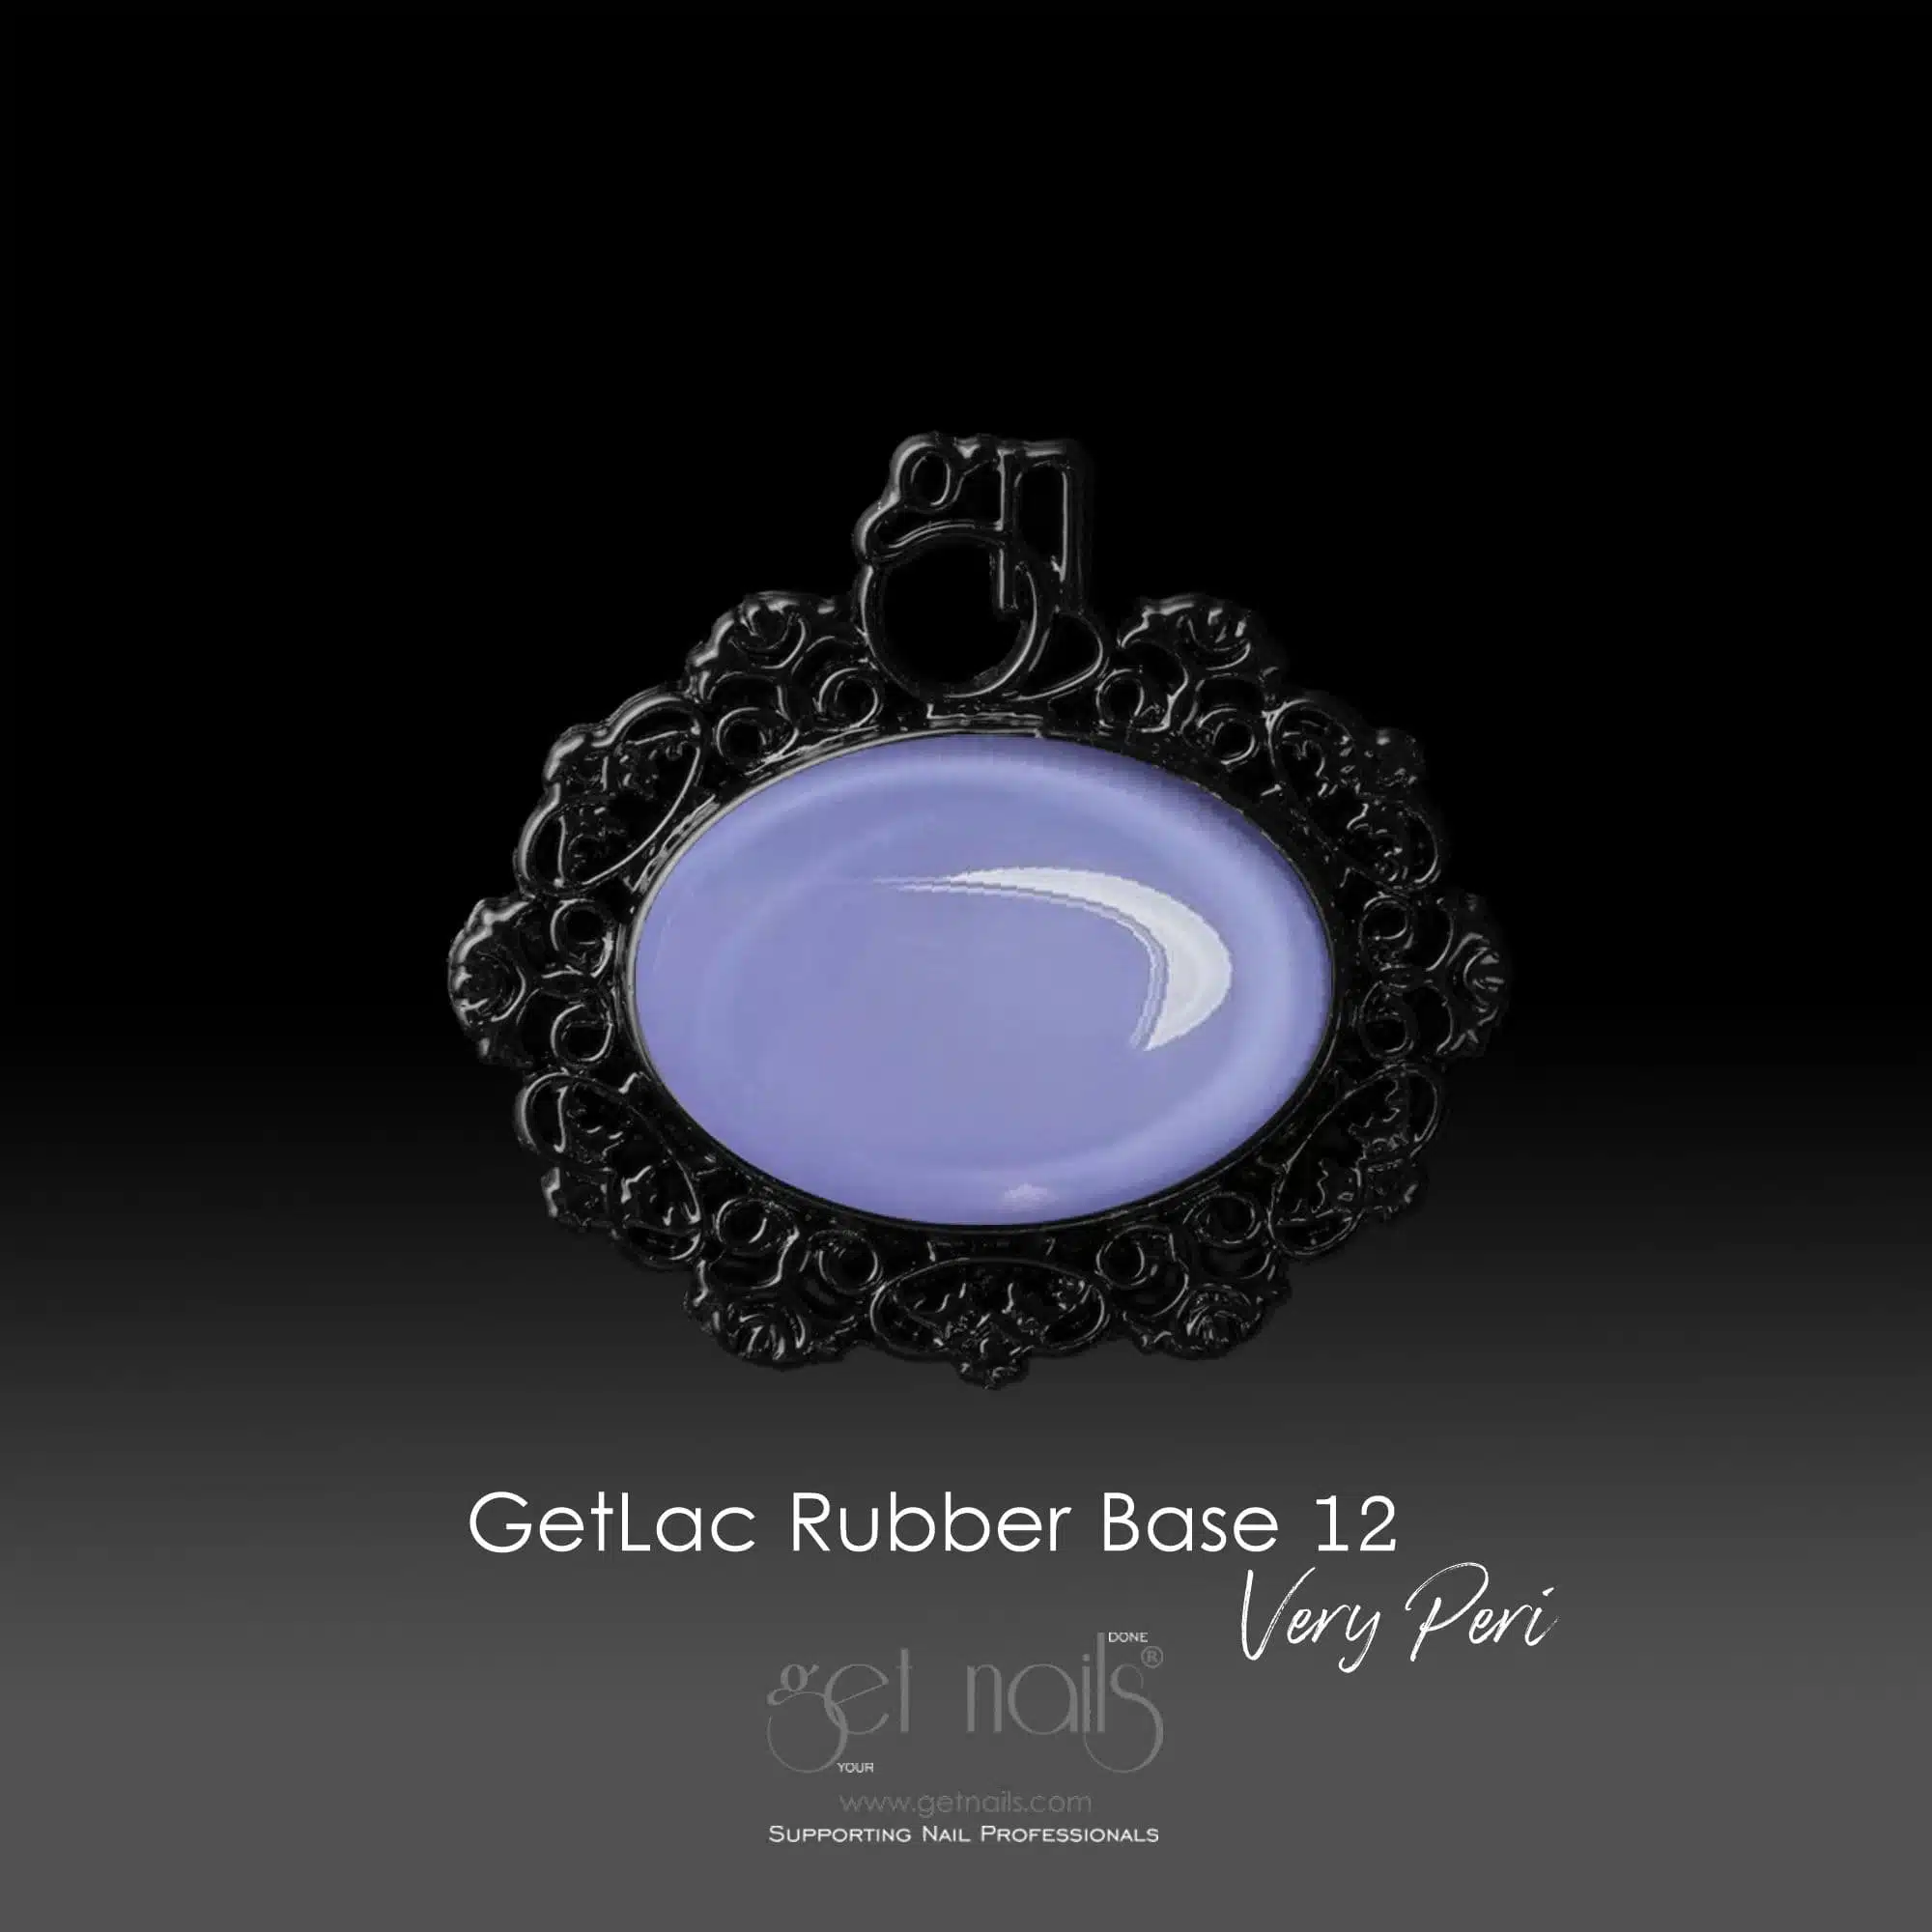 Get Nails Austria - GetLac Rubber Base 12 Very Peri 15г